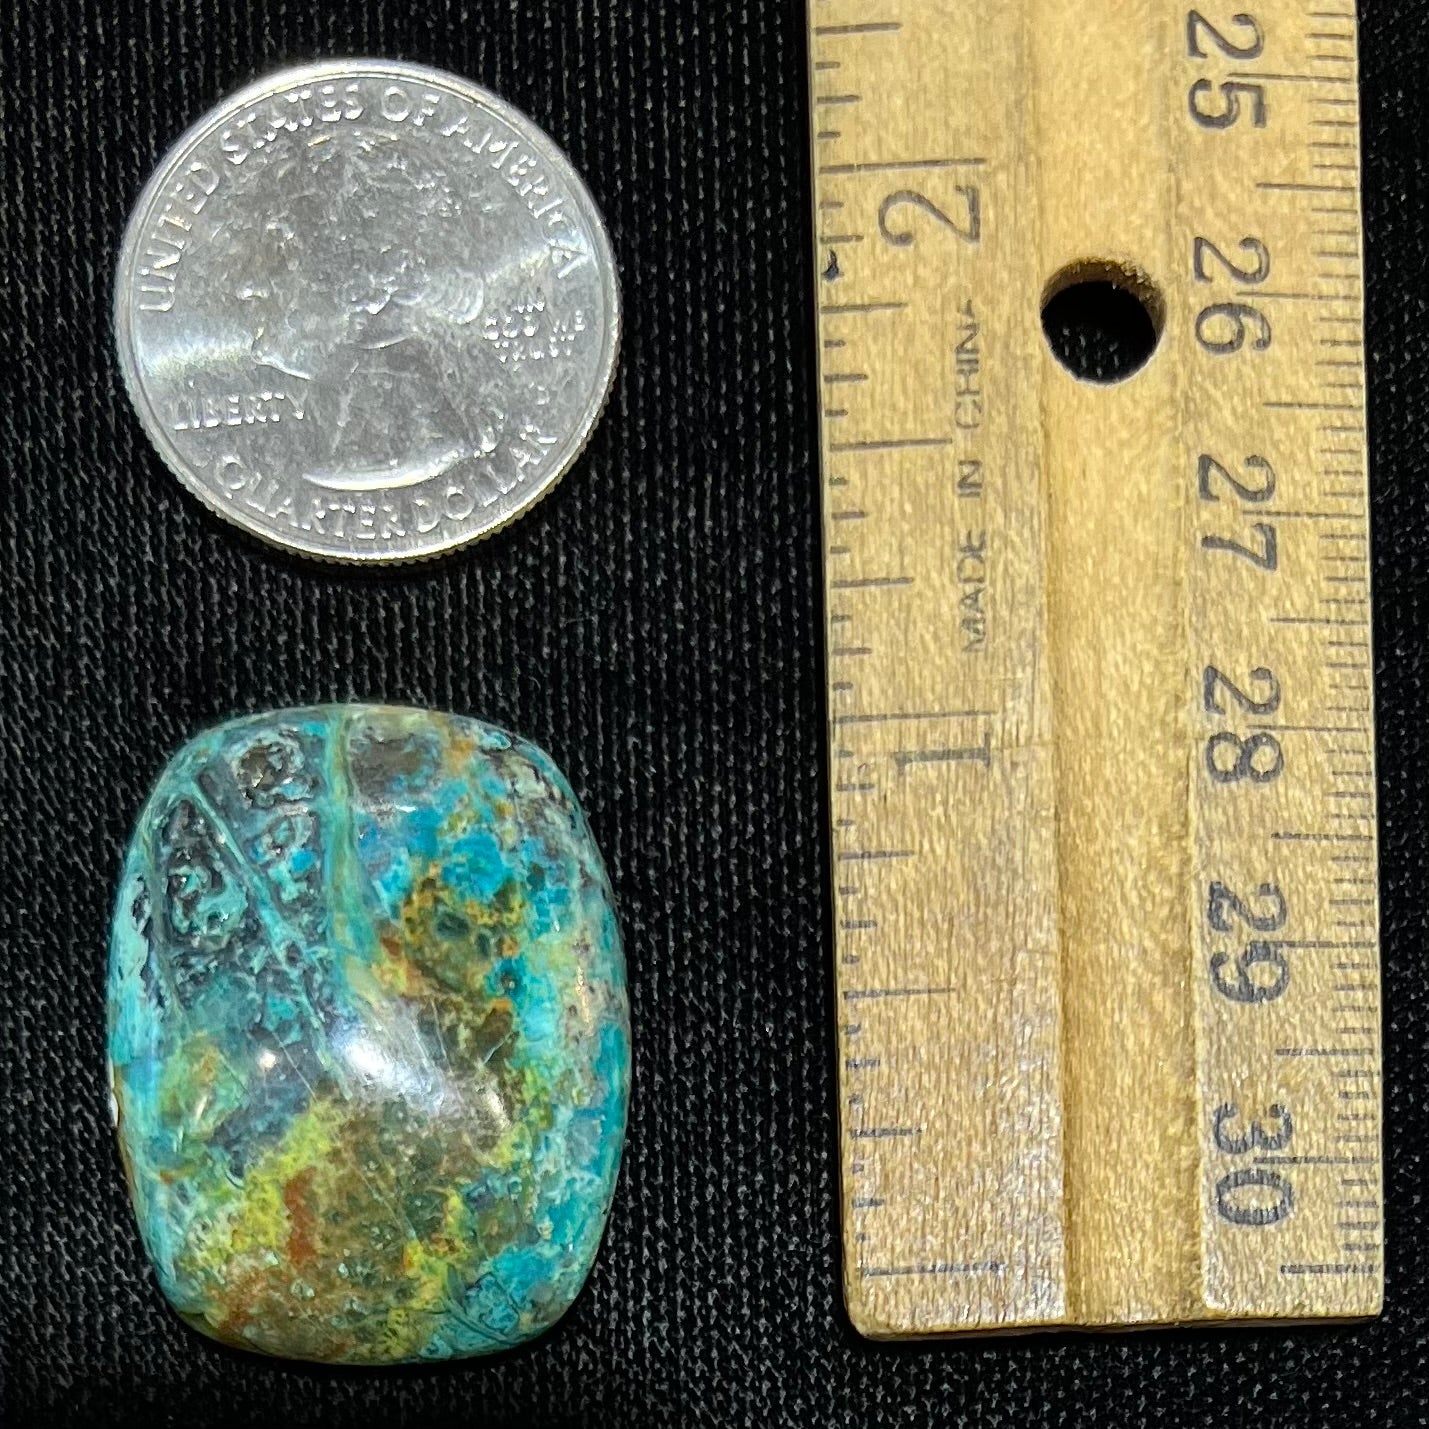 Loose turquoise with chrysocolla cabochon from Mohave County, Arizona.